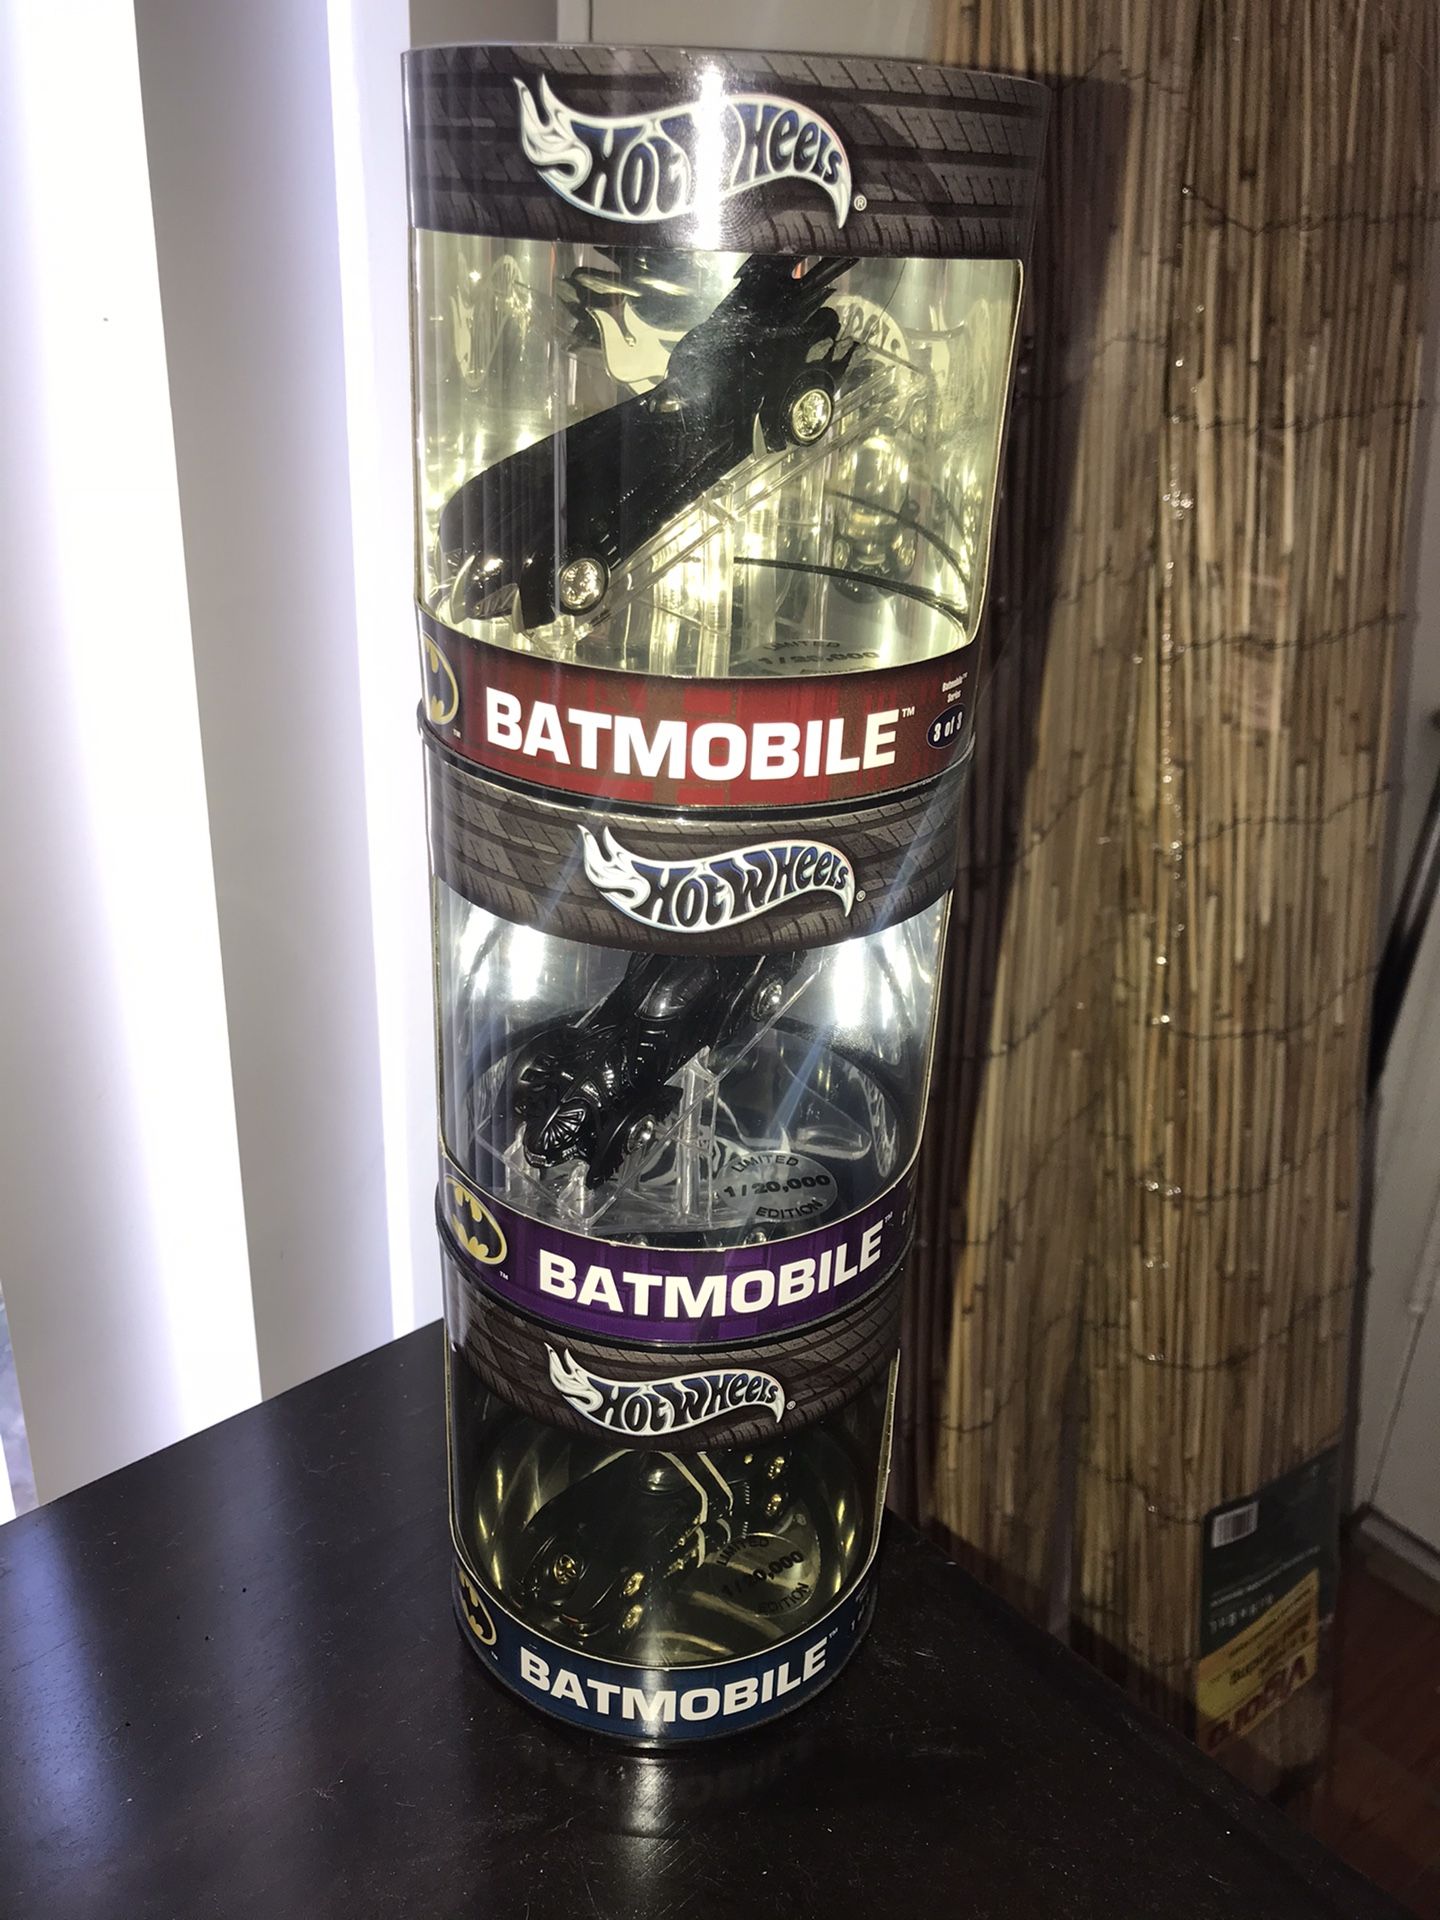 Hot Wheel Batmobile oil can set of 3. Limited edition